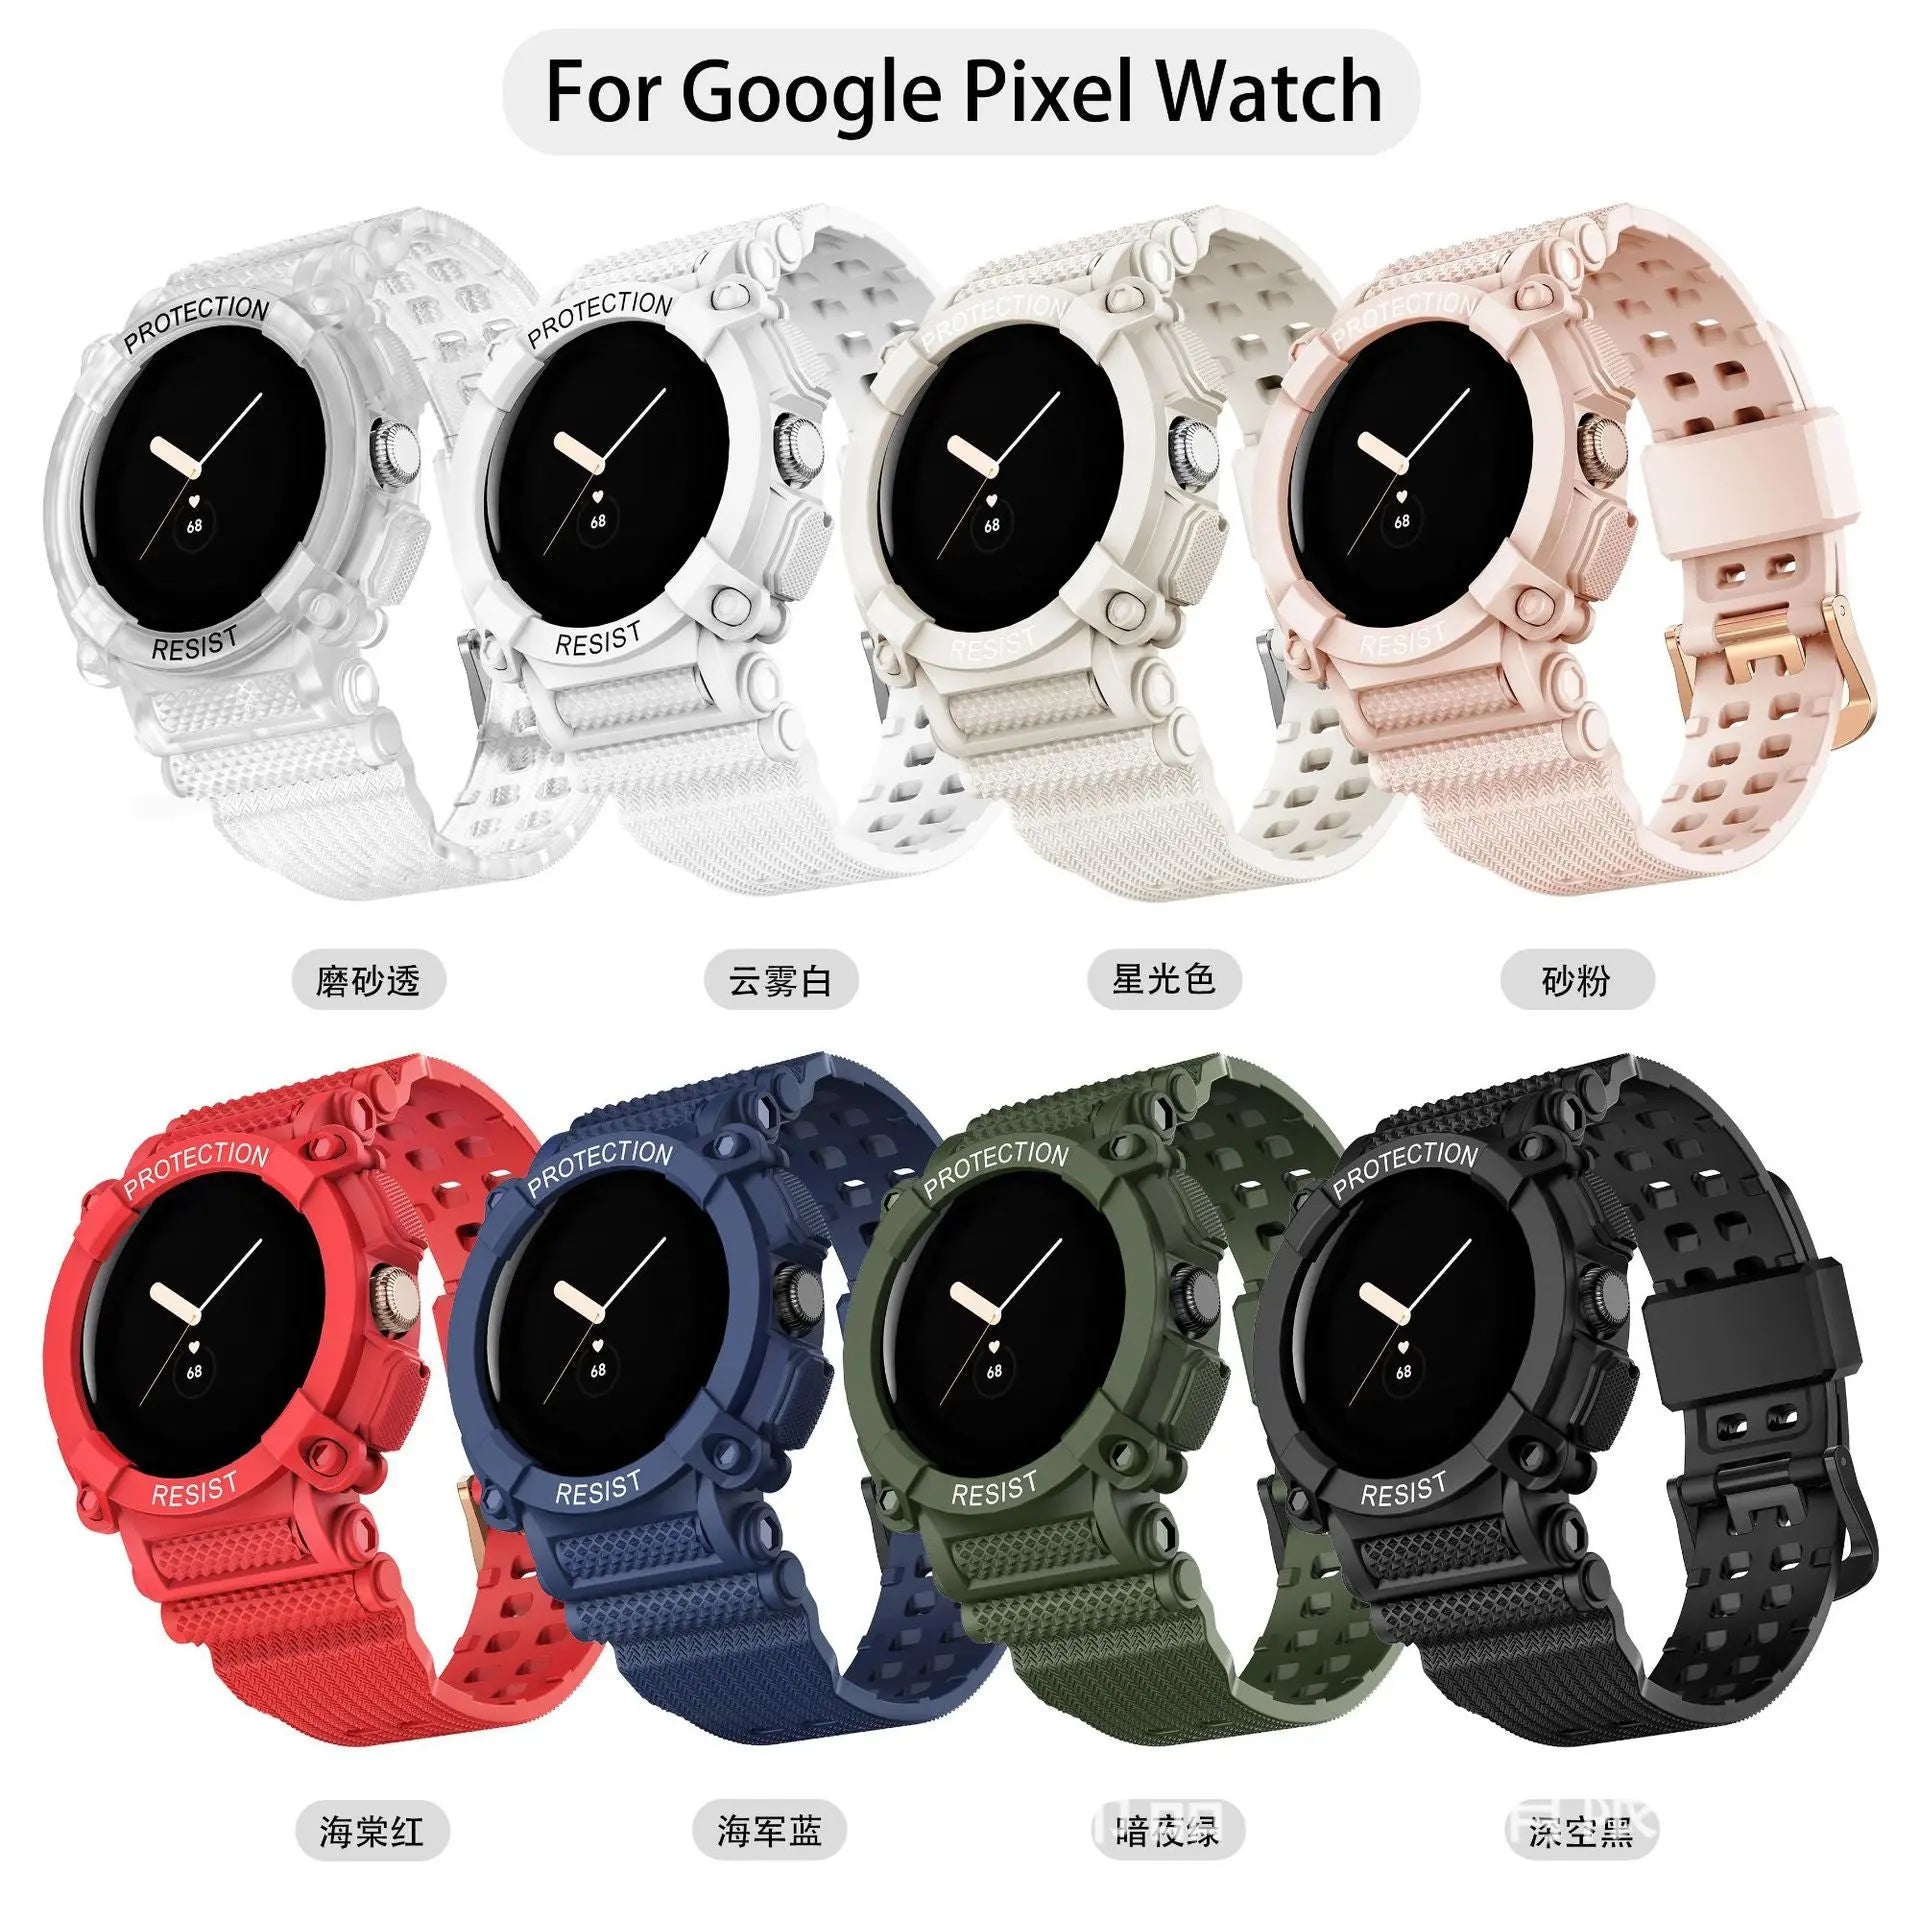 Pinnacle Band And Case Protection For Google Pixel Watch - Pinnacle Luxuries